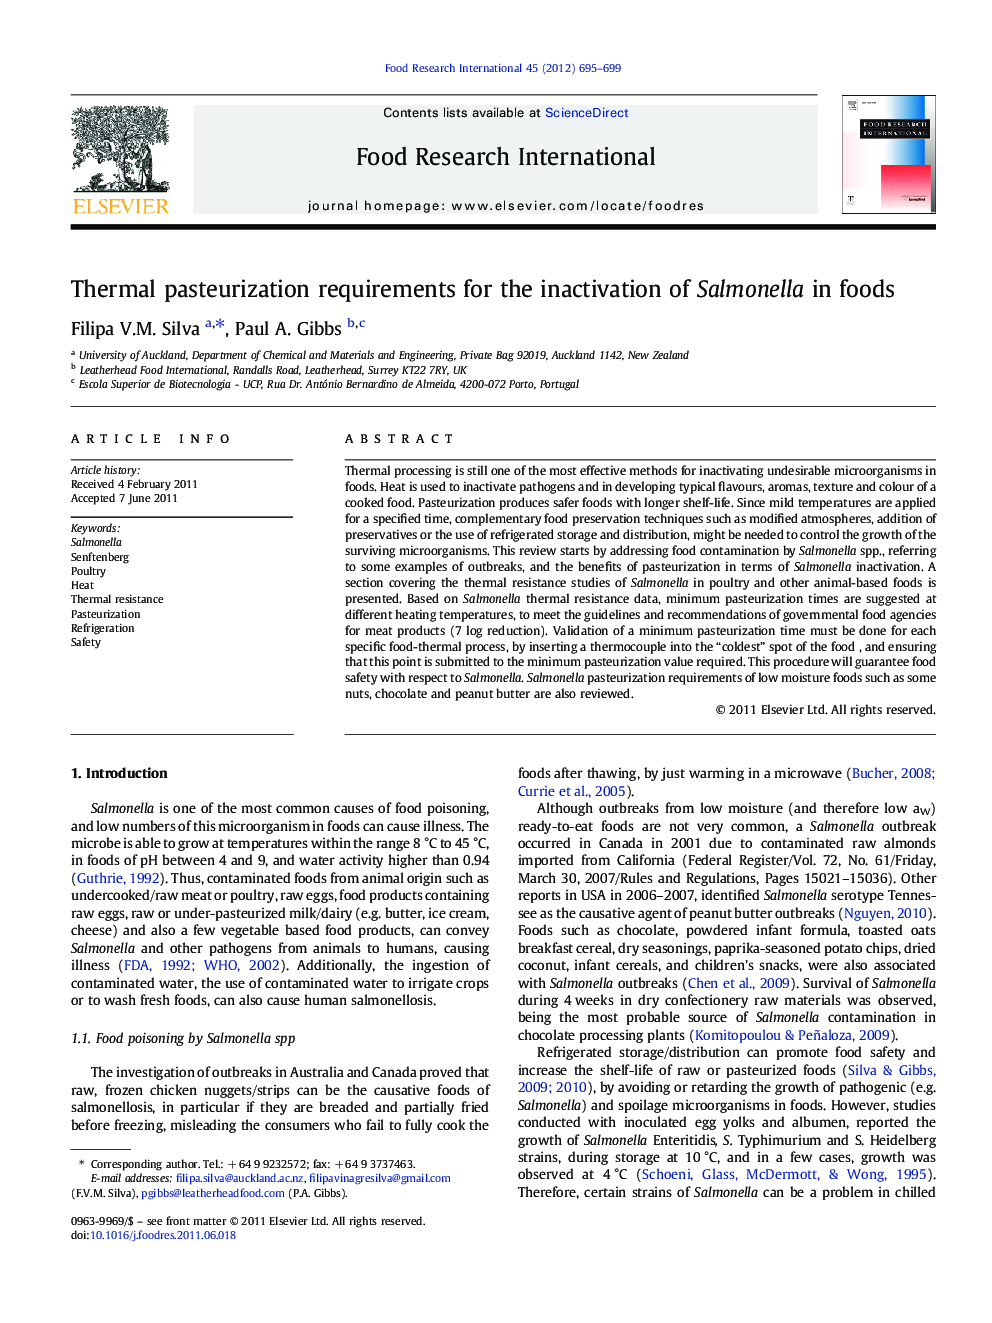 Thermal pasteurization requirements for the inactivation of Salmonella in foods